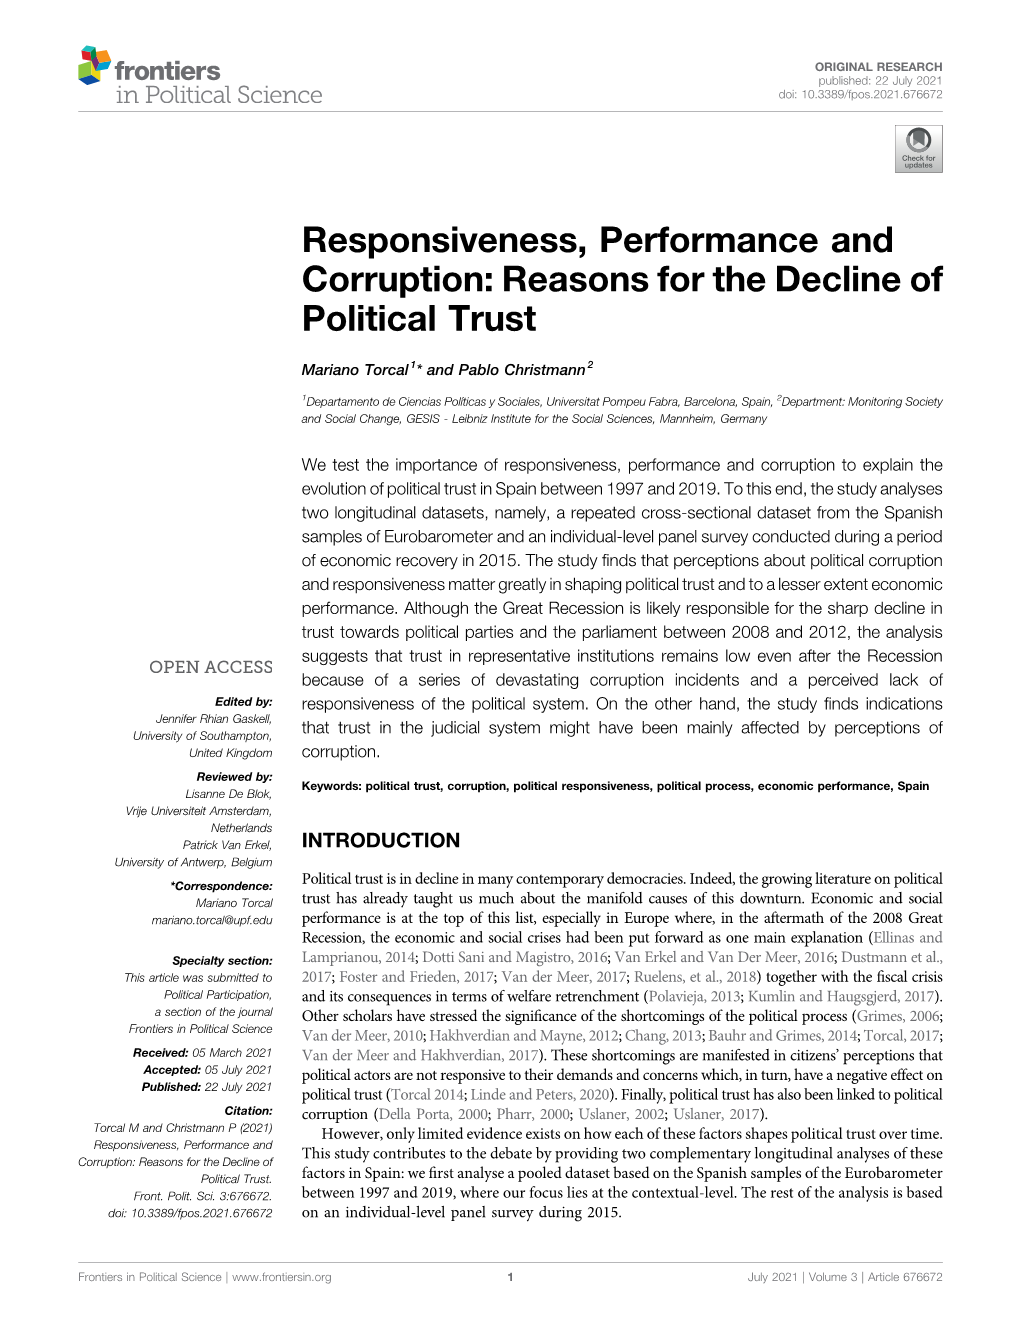 Reasons for the Decline of Political Trust